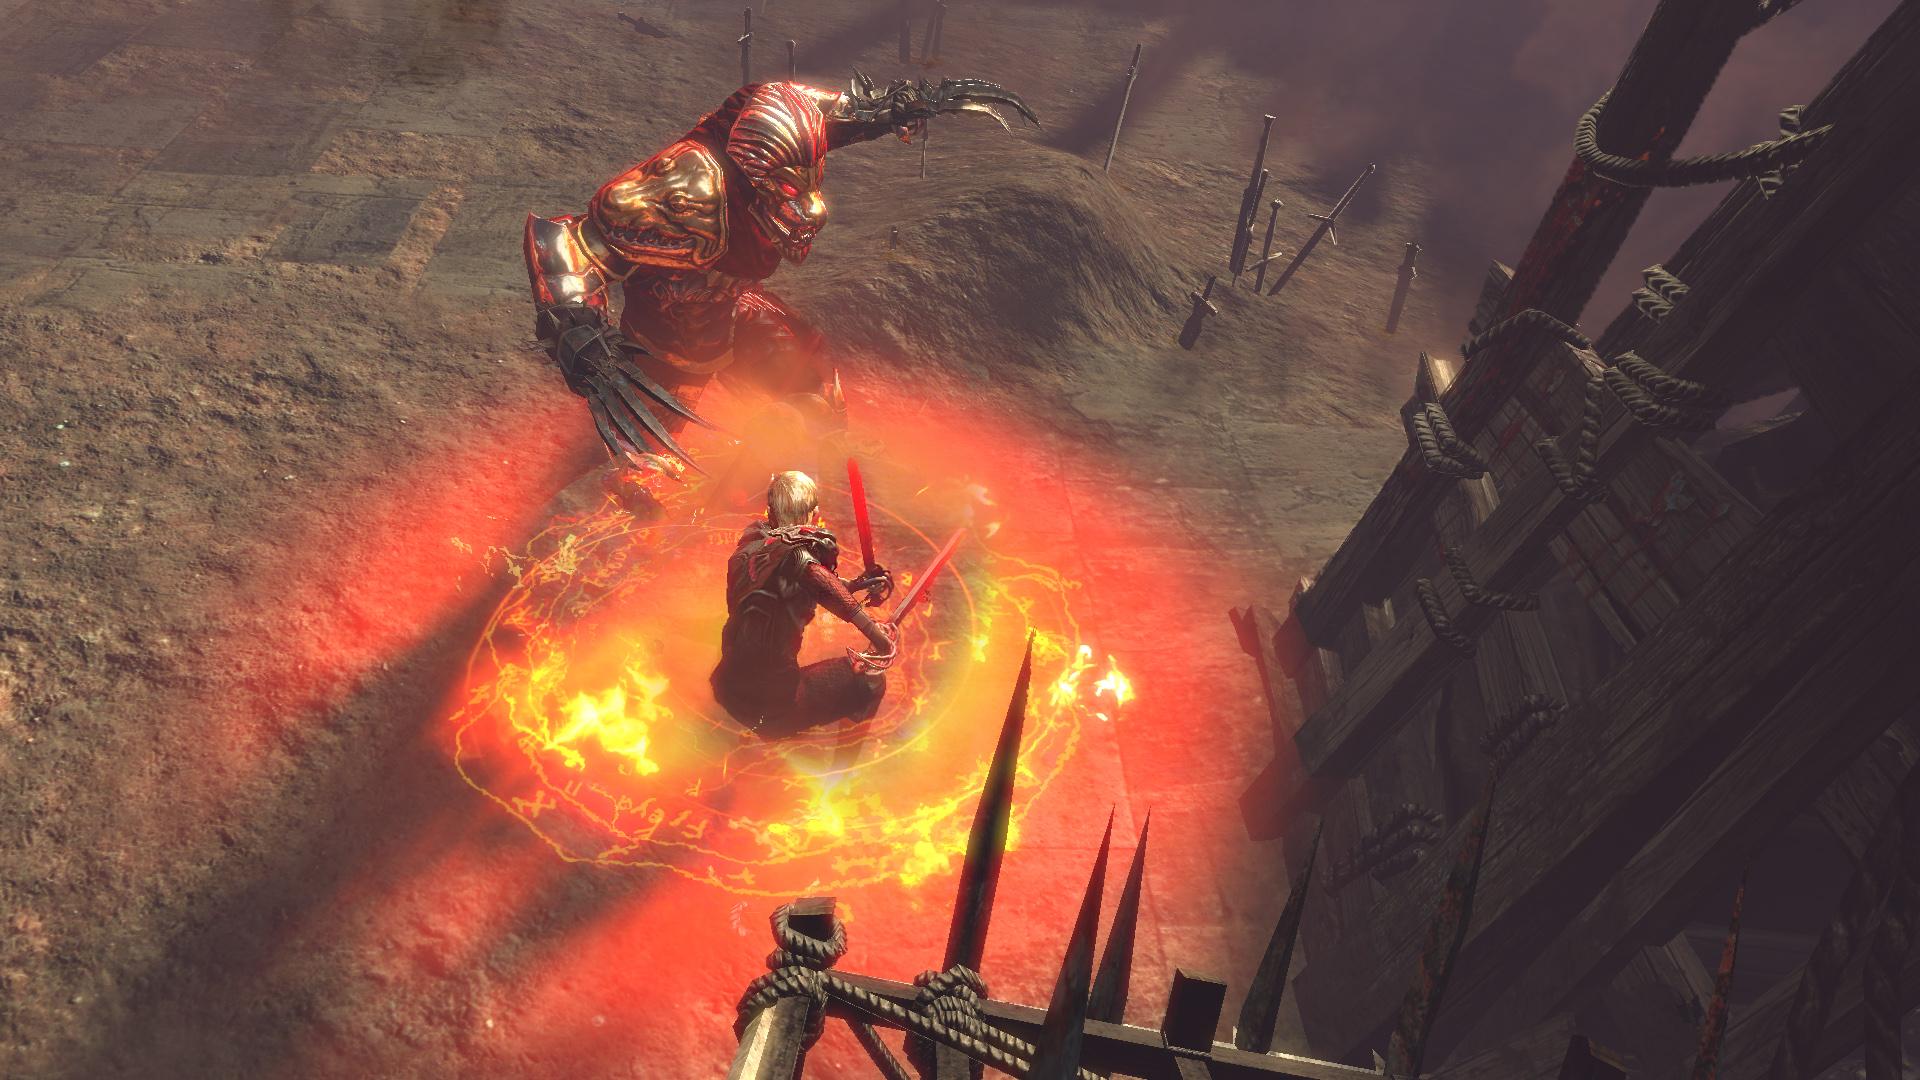 Screenshot №42 from game Path of Exile